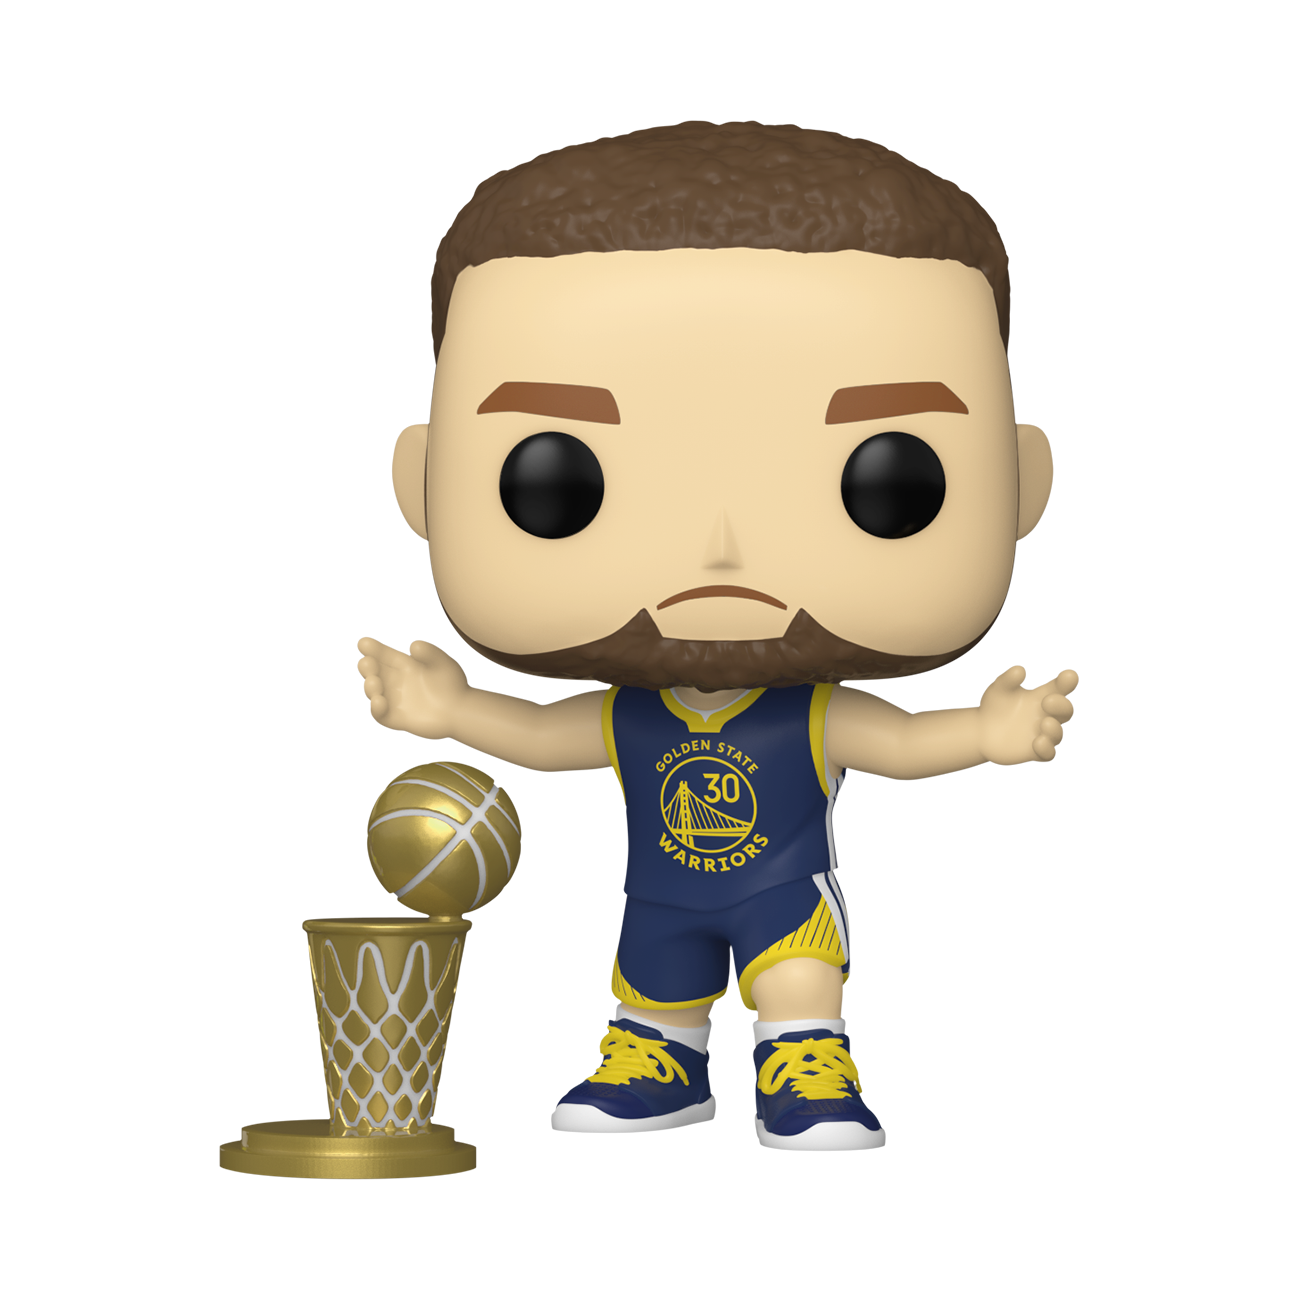 Buy Pop! Stephen Curry with Trophy at Funko.